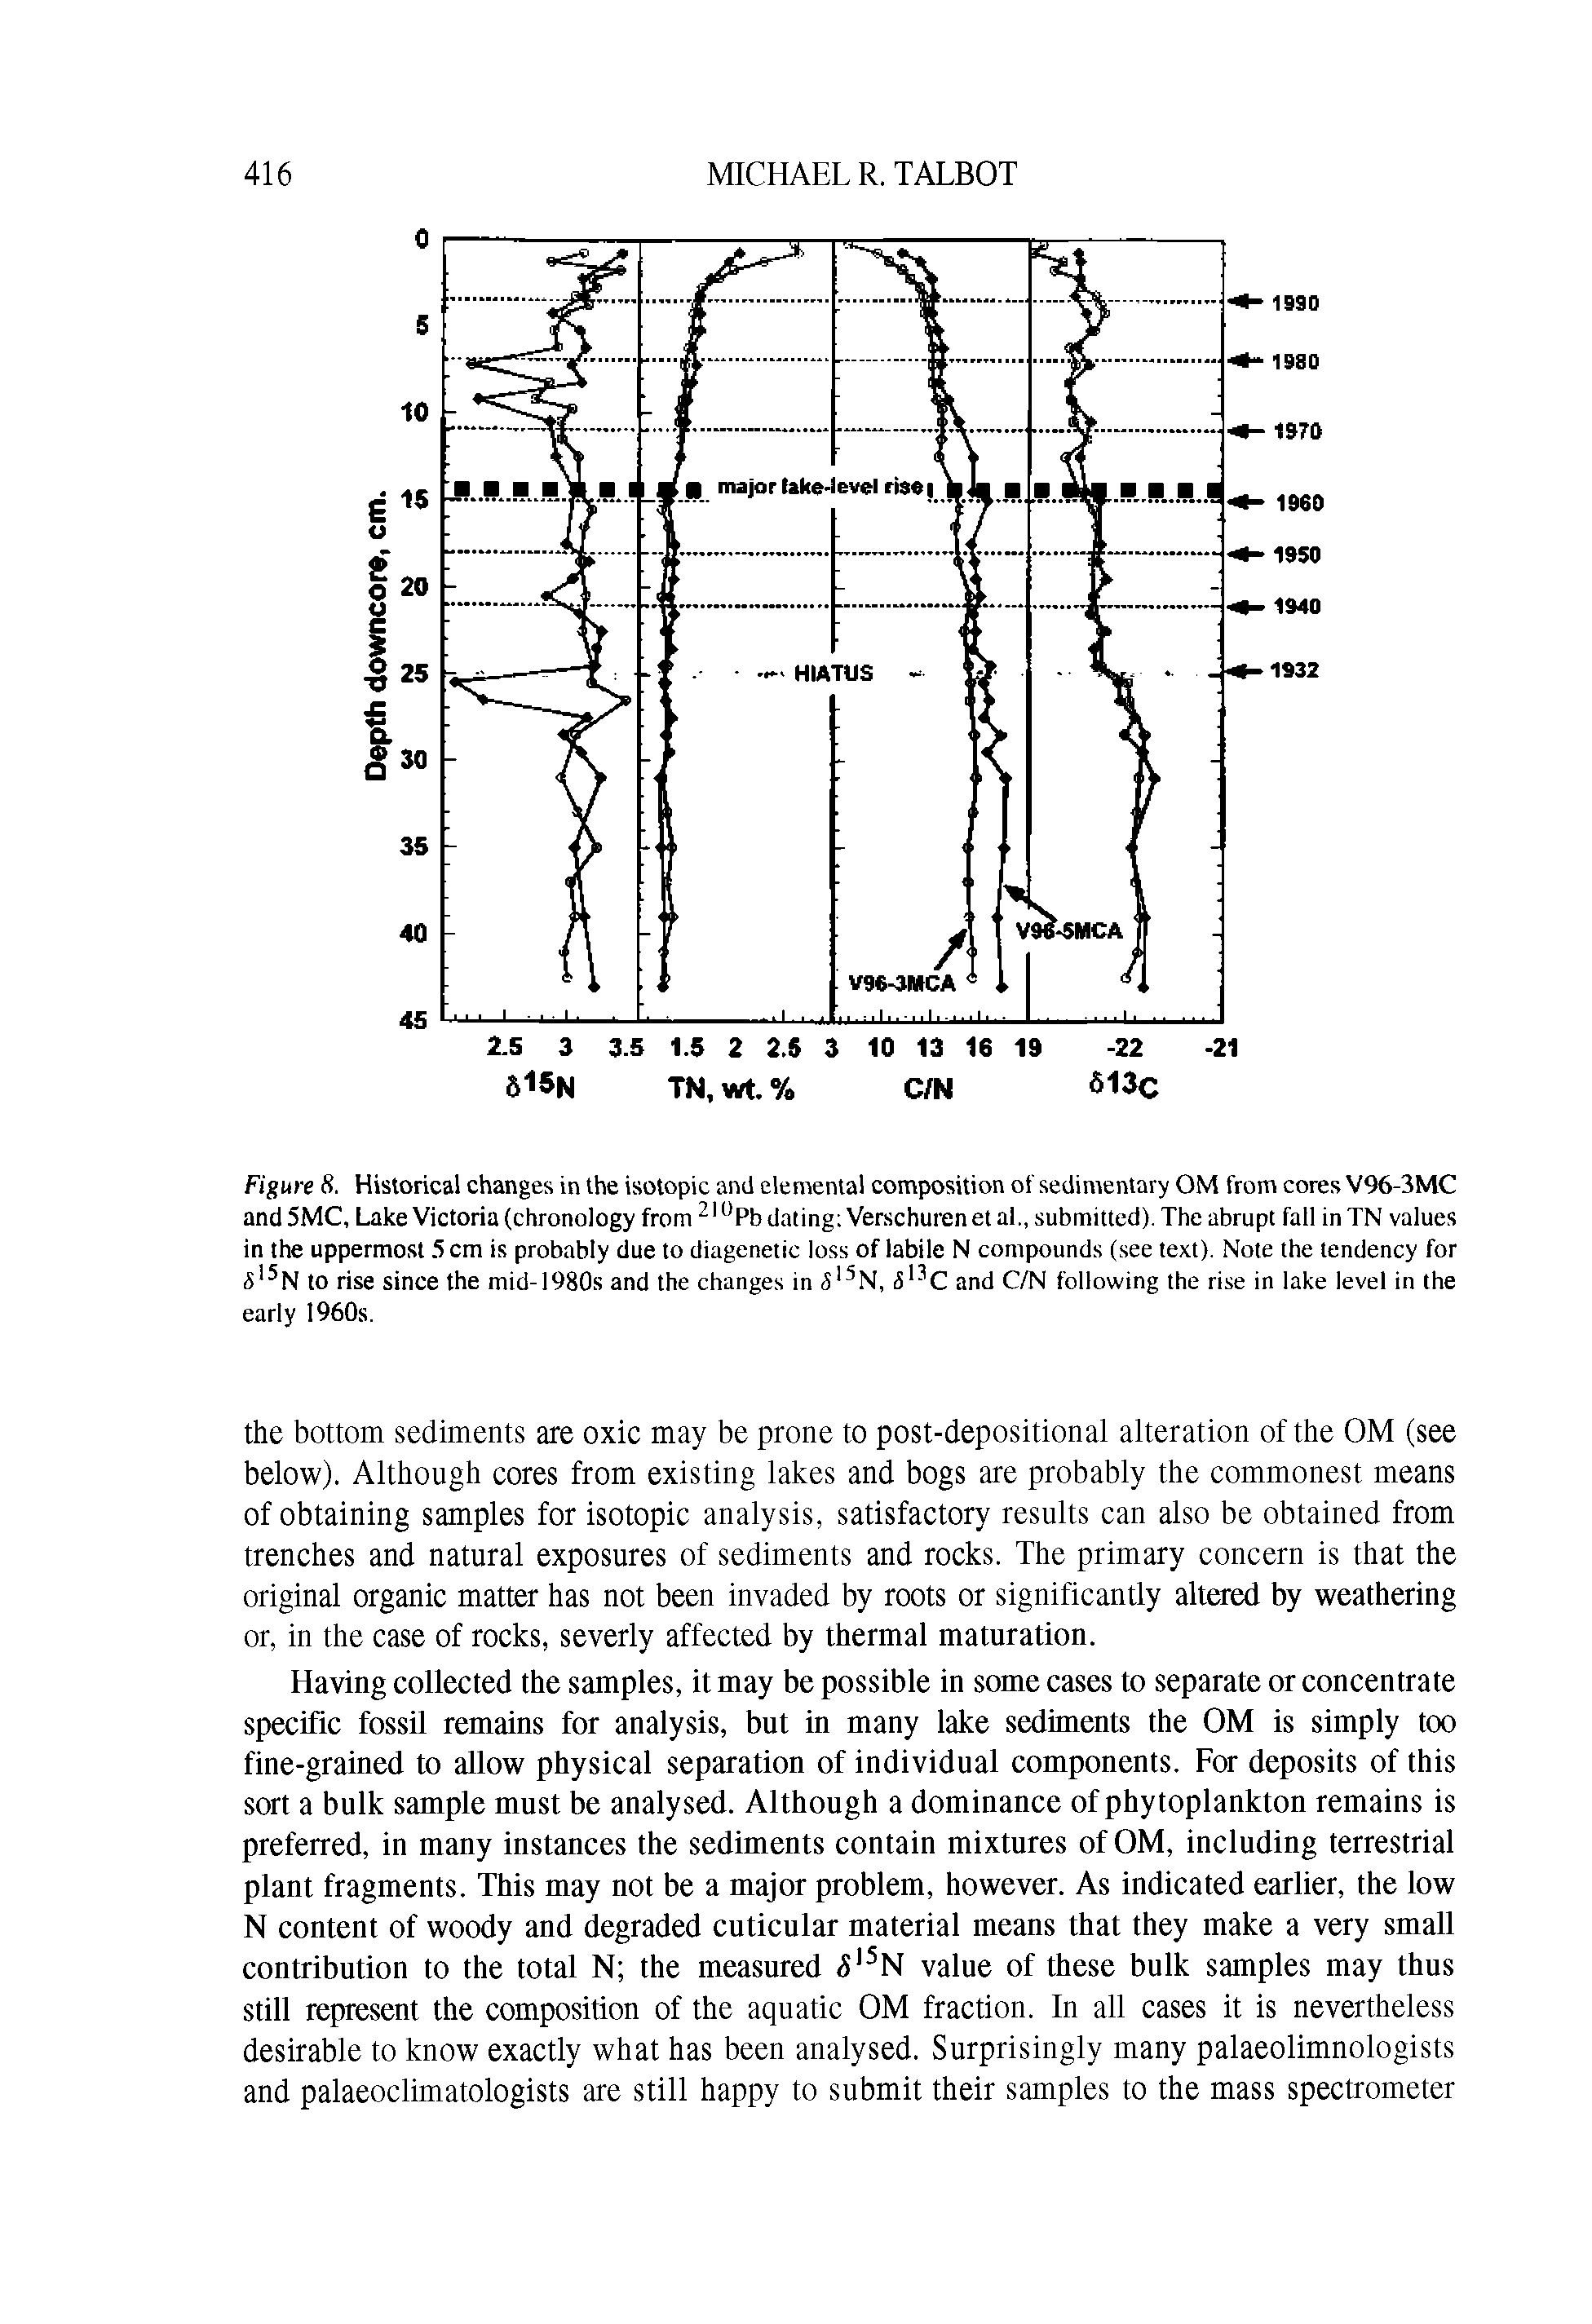 Figure 8. Historical changes in the isotopic and elemental composition of sedimentary OM from cores V96-3MC and SMC, Lake Victoria (chronology from Pbdaling Verschurenetal., submitted). The abrupt fall inTN values in the uppermost 5 cm is probably due to diagenetic loss of labile N compounds (see text). Note the tendency for to rise since the mid-1980s and the changes in 5 N, and C/N following the rise in lake level in the early 1960s.